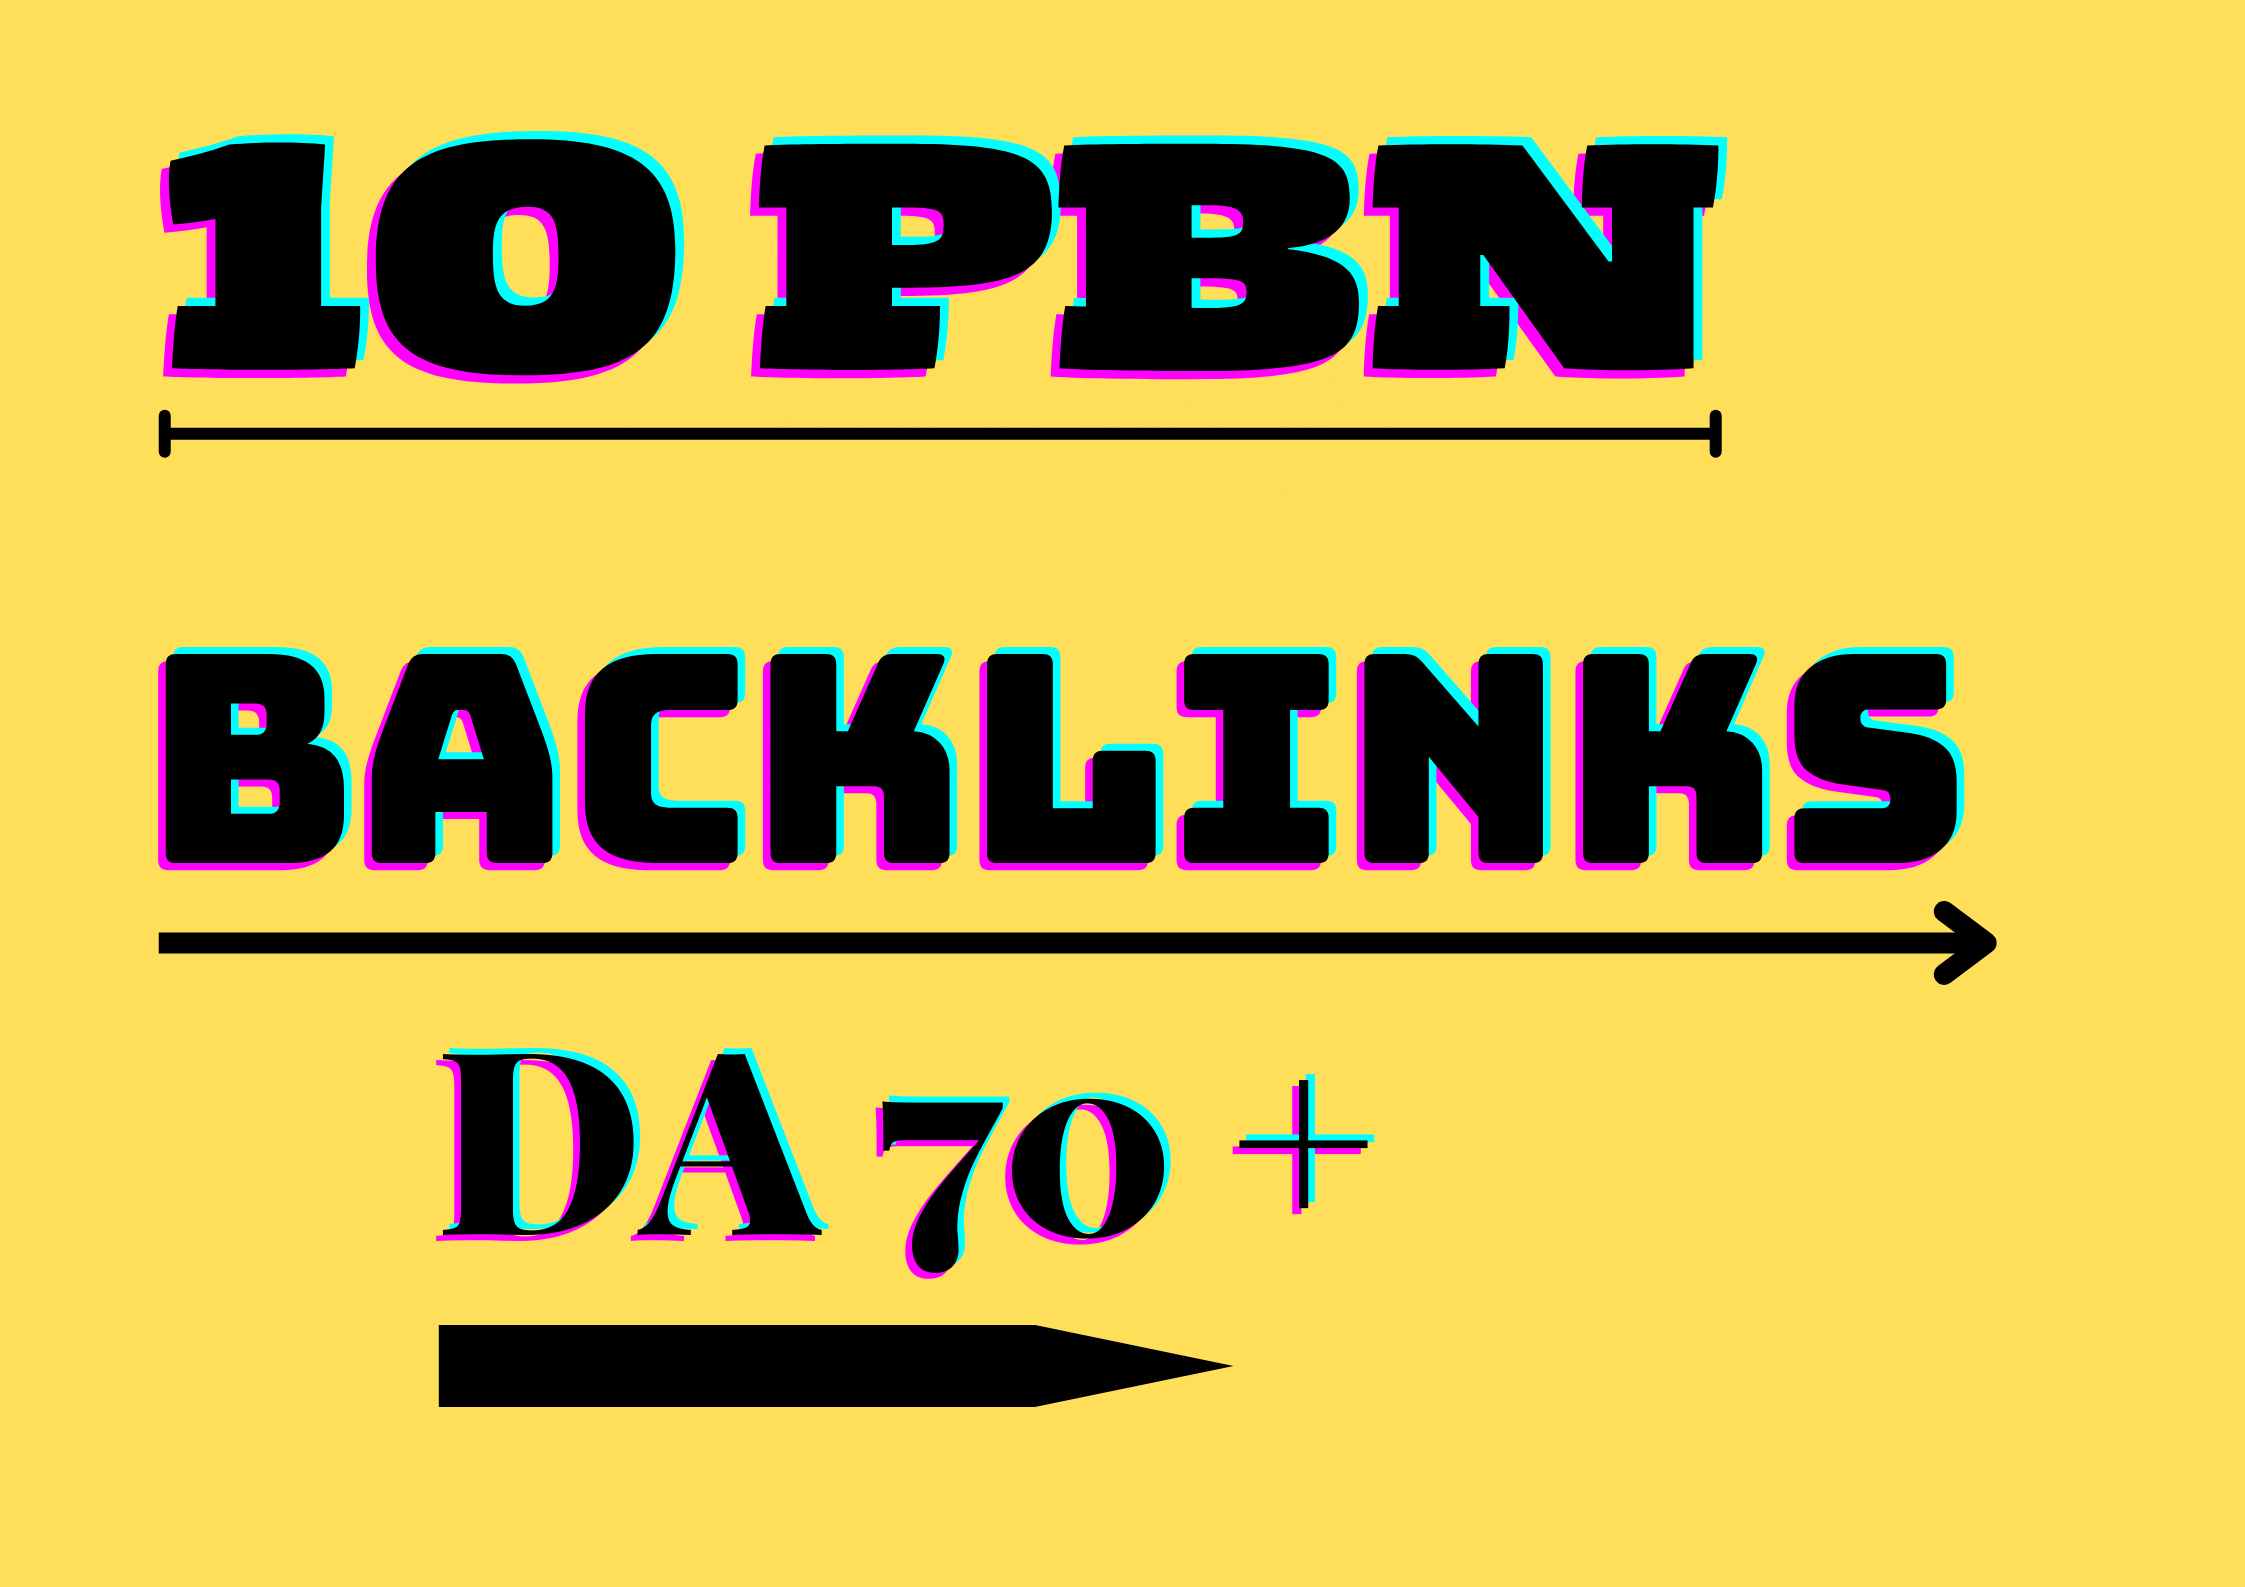 Sky rocket your website ranking by 10 Home Page PBN backlinks Da 70 plus 